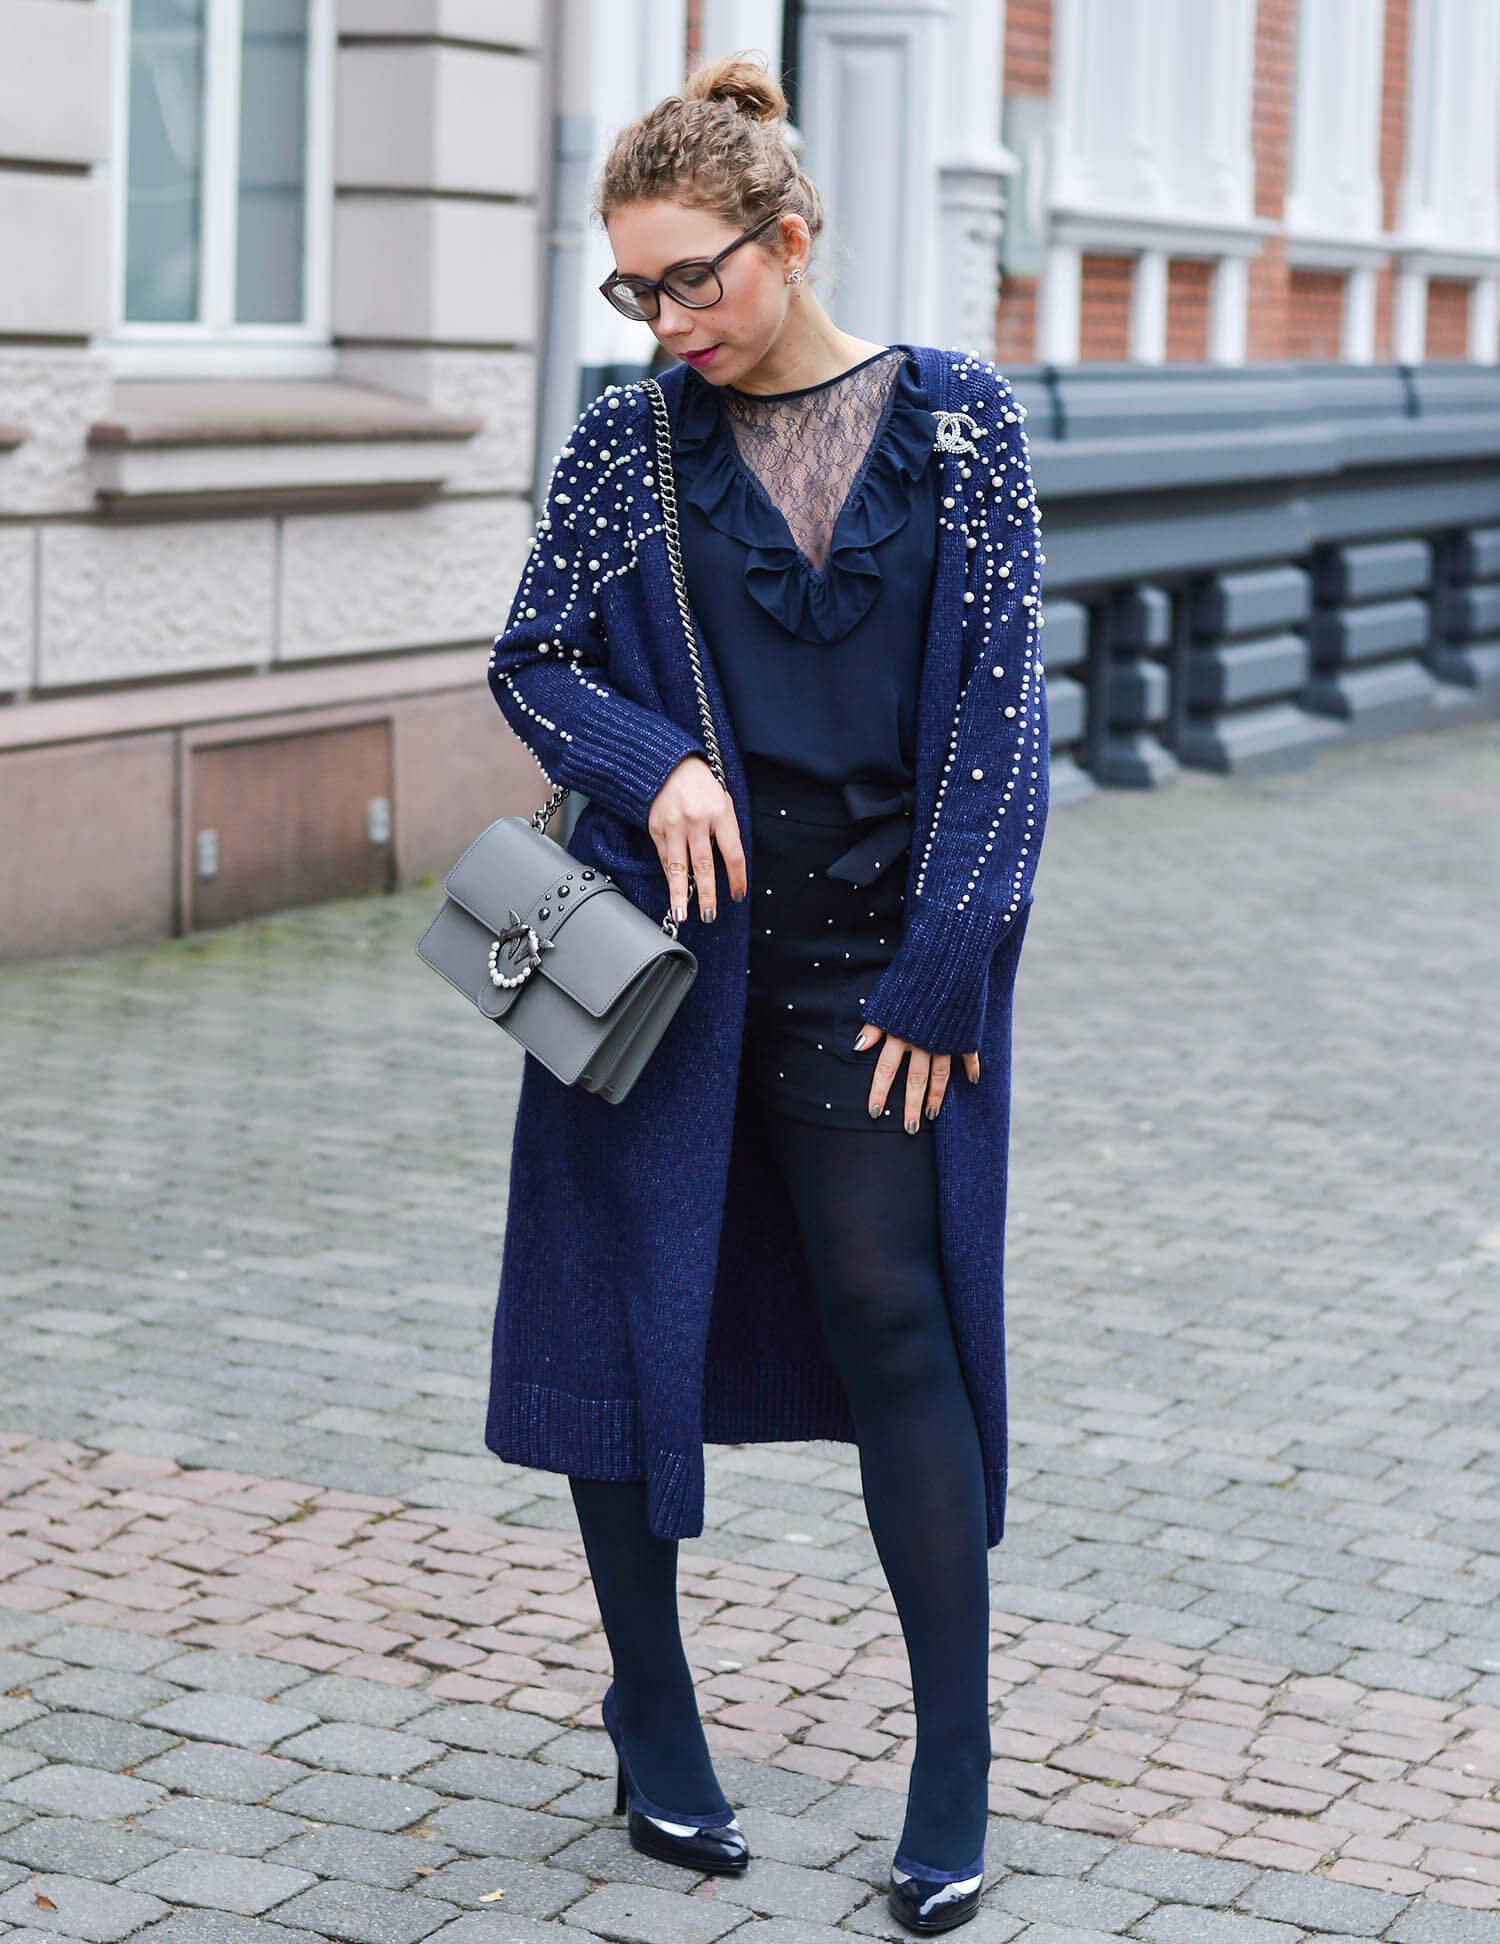 Kationette-Outfit-Zara-Long-Cardigan-with-pearls-Michael-Kors-Access-Sofie-Smartwatch-and-Pinko-Bag-fashionblogger-nrw